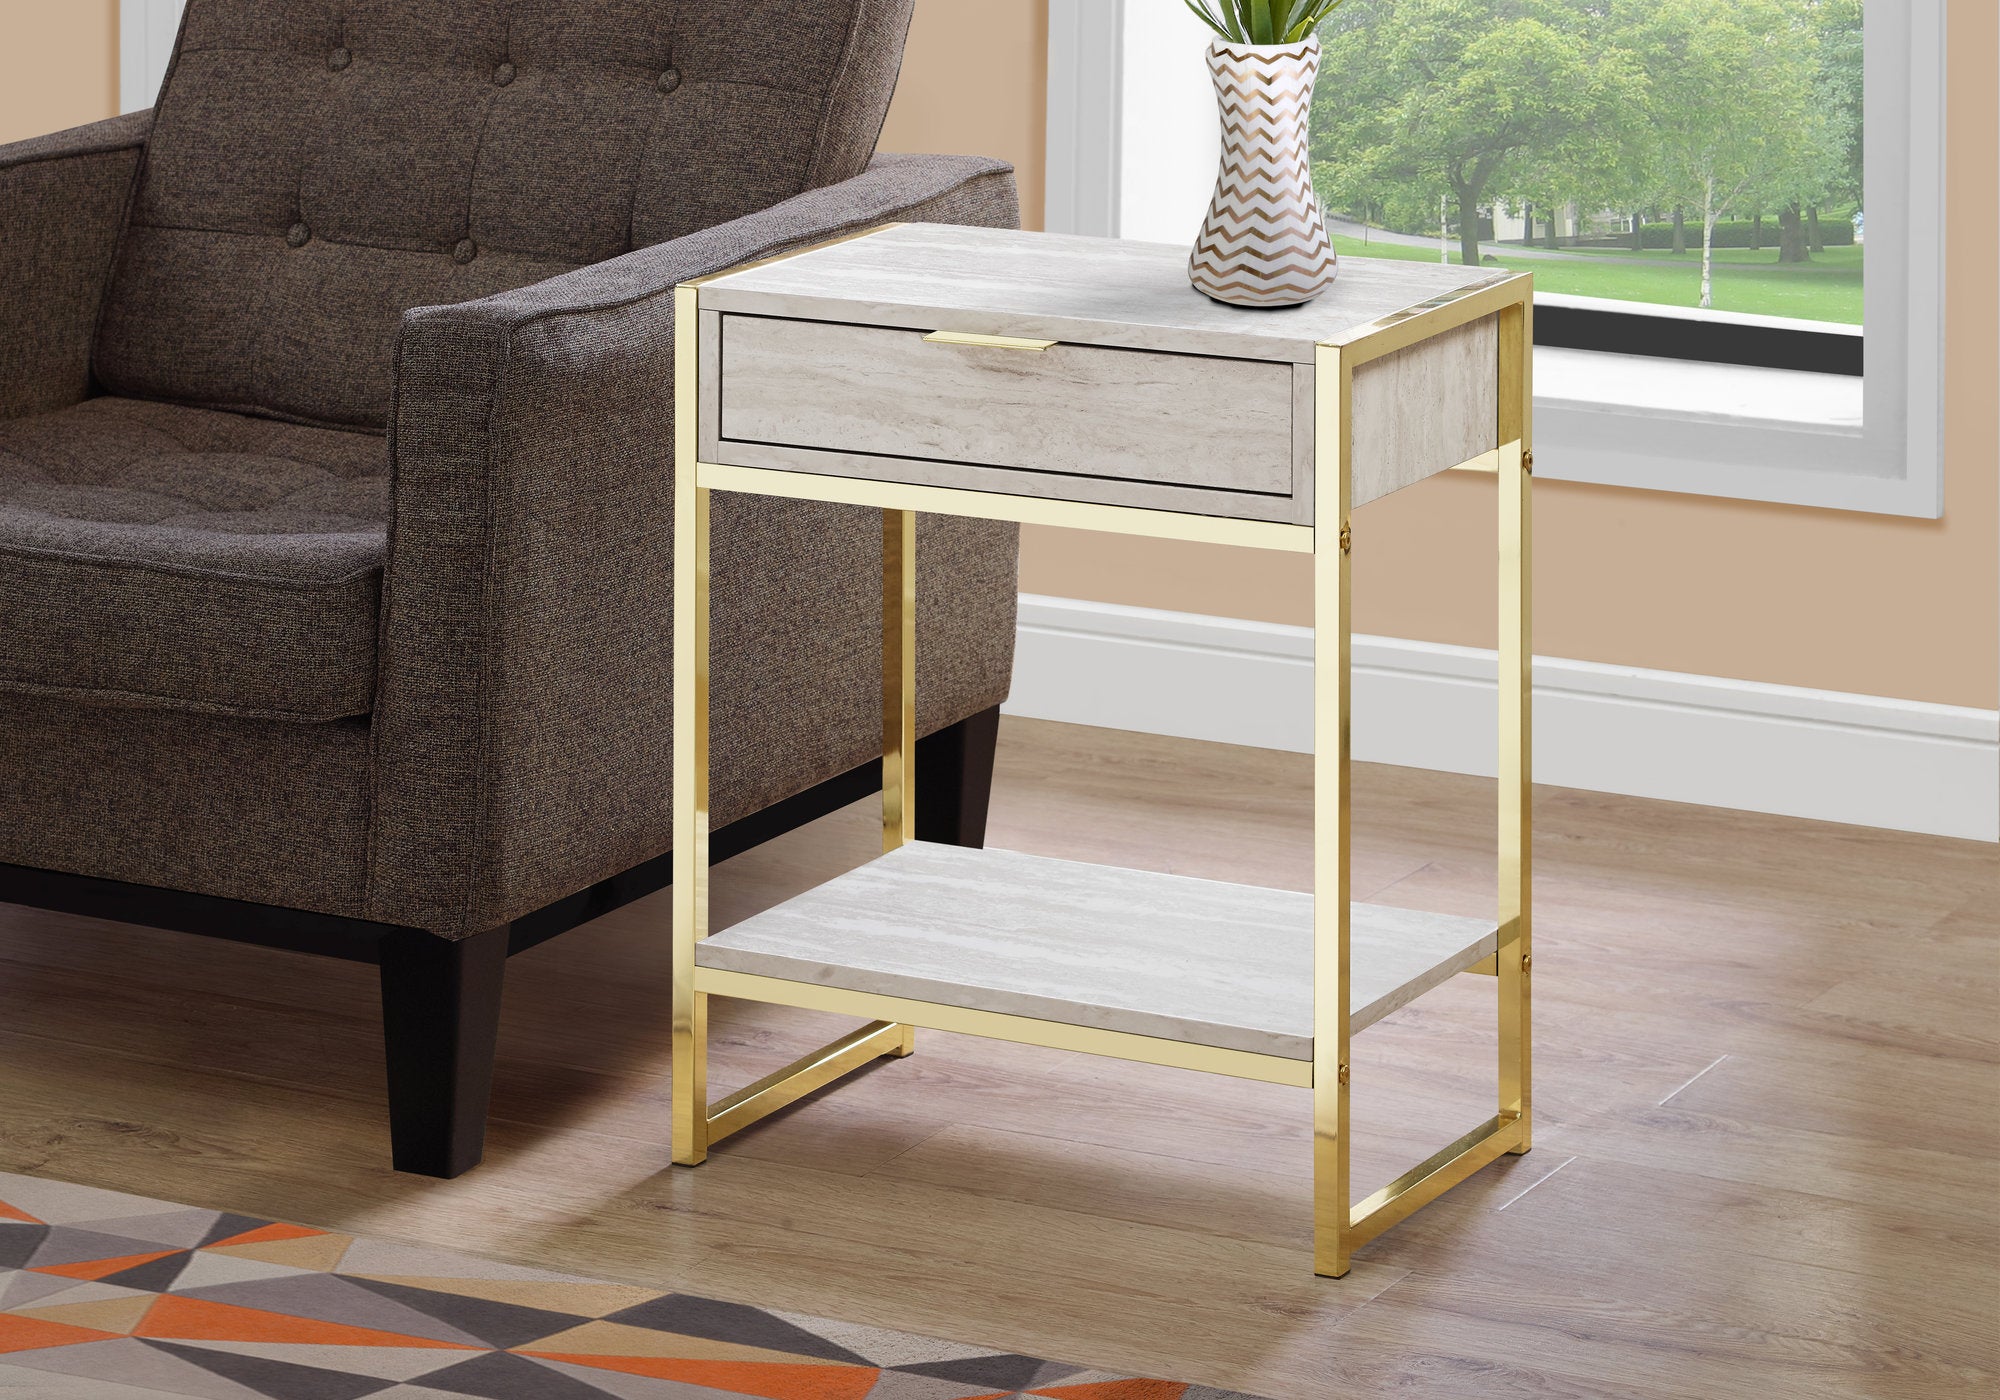 MN-903483    Accent Table, Side, End, Nightstand, Lamp, Living Room, Bedroom, Metal Legs, Laminate, Beige Marble, Gold, Contemporary, Modern